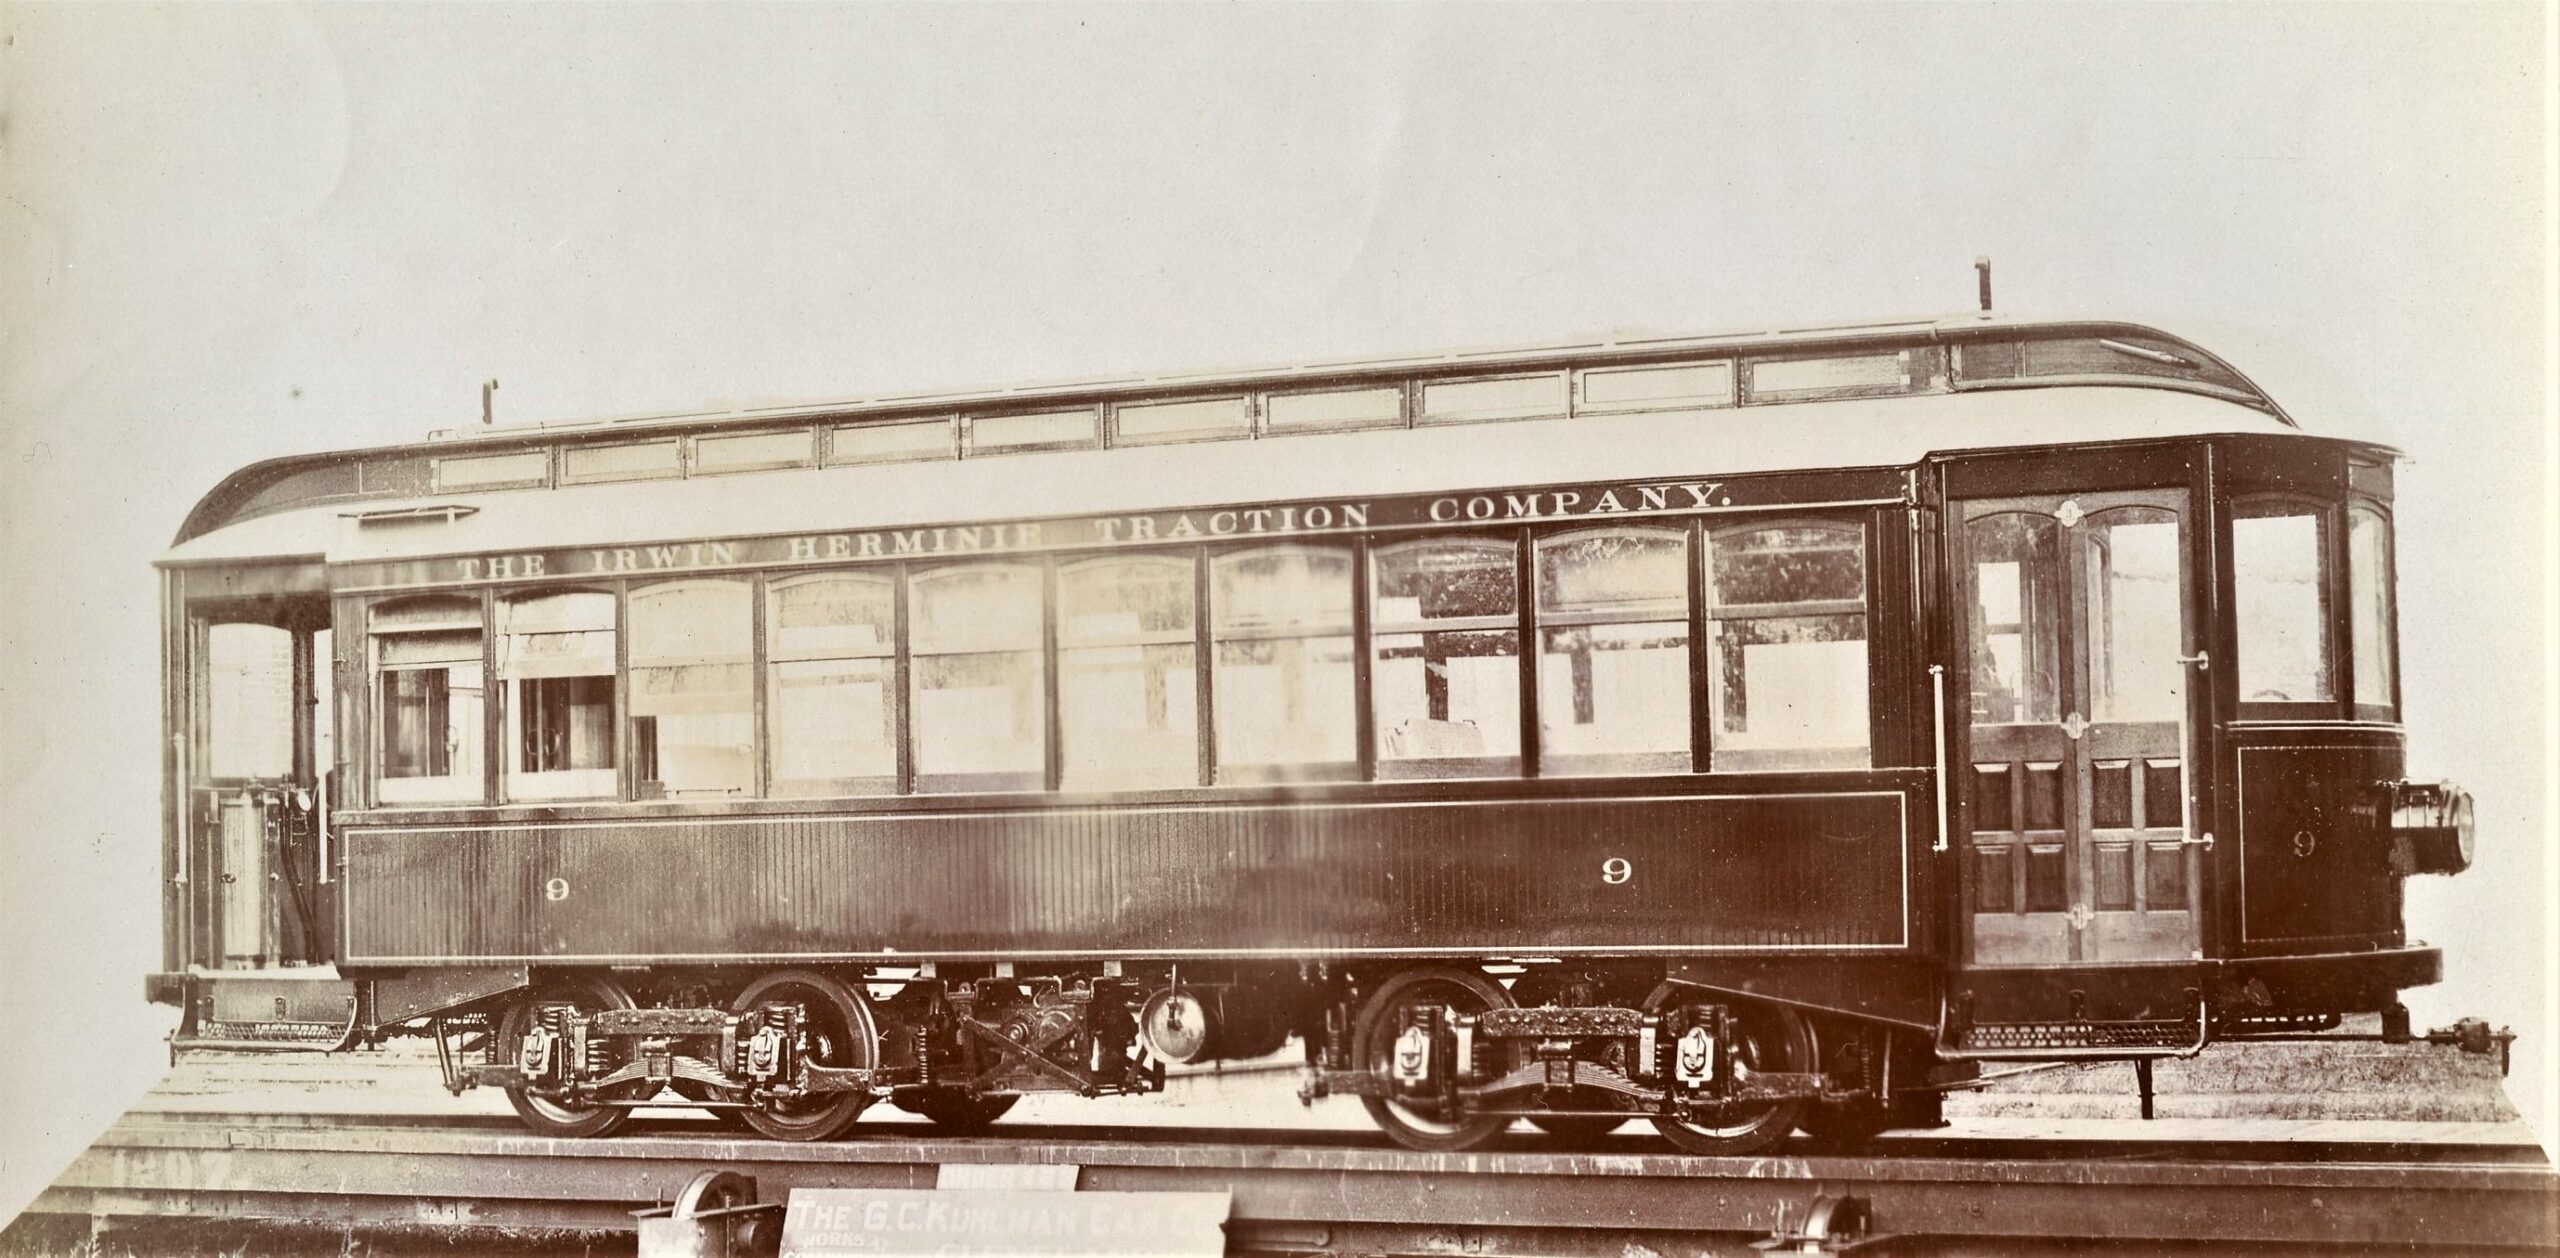 The Irwin Herminie Traction Company | Cleveland, Ohio | Kuhlman car #9 | 1910 | G.C. Kuhlman builder’s photograph | NJCNRhS Collection